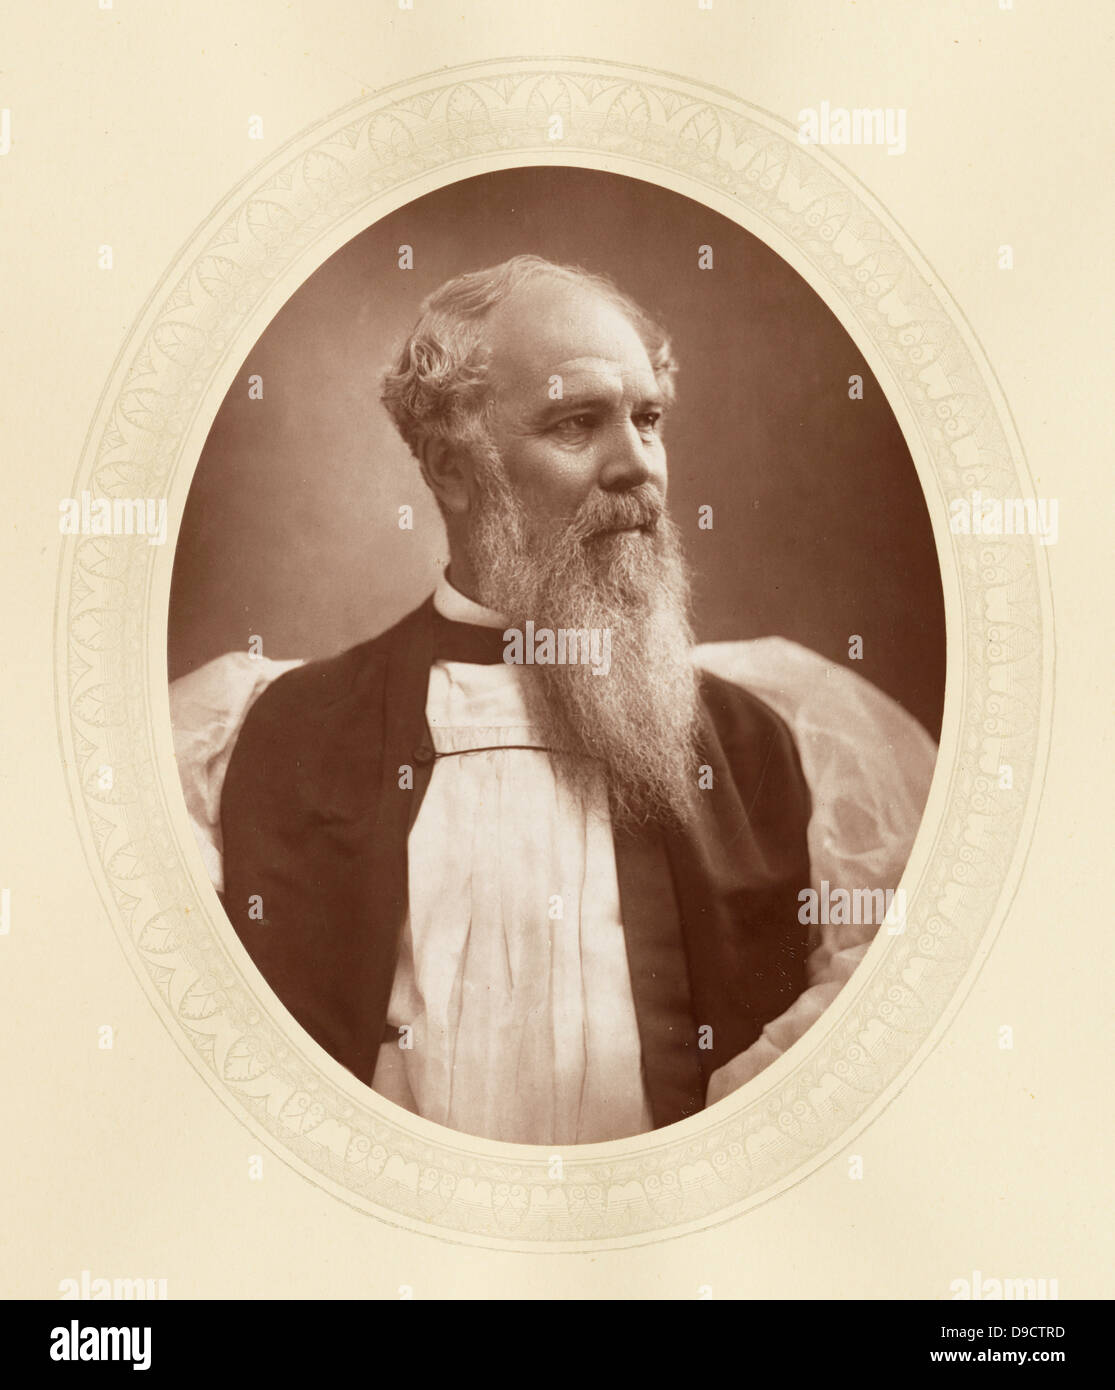 John Charles Ryle (1816-1900) c1880, English churchman and supporter of the evangelical school. He was the first bishop in the newly created Anglican See of Liverpool. Stock Photo